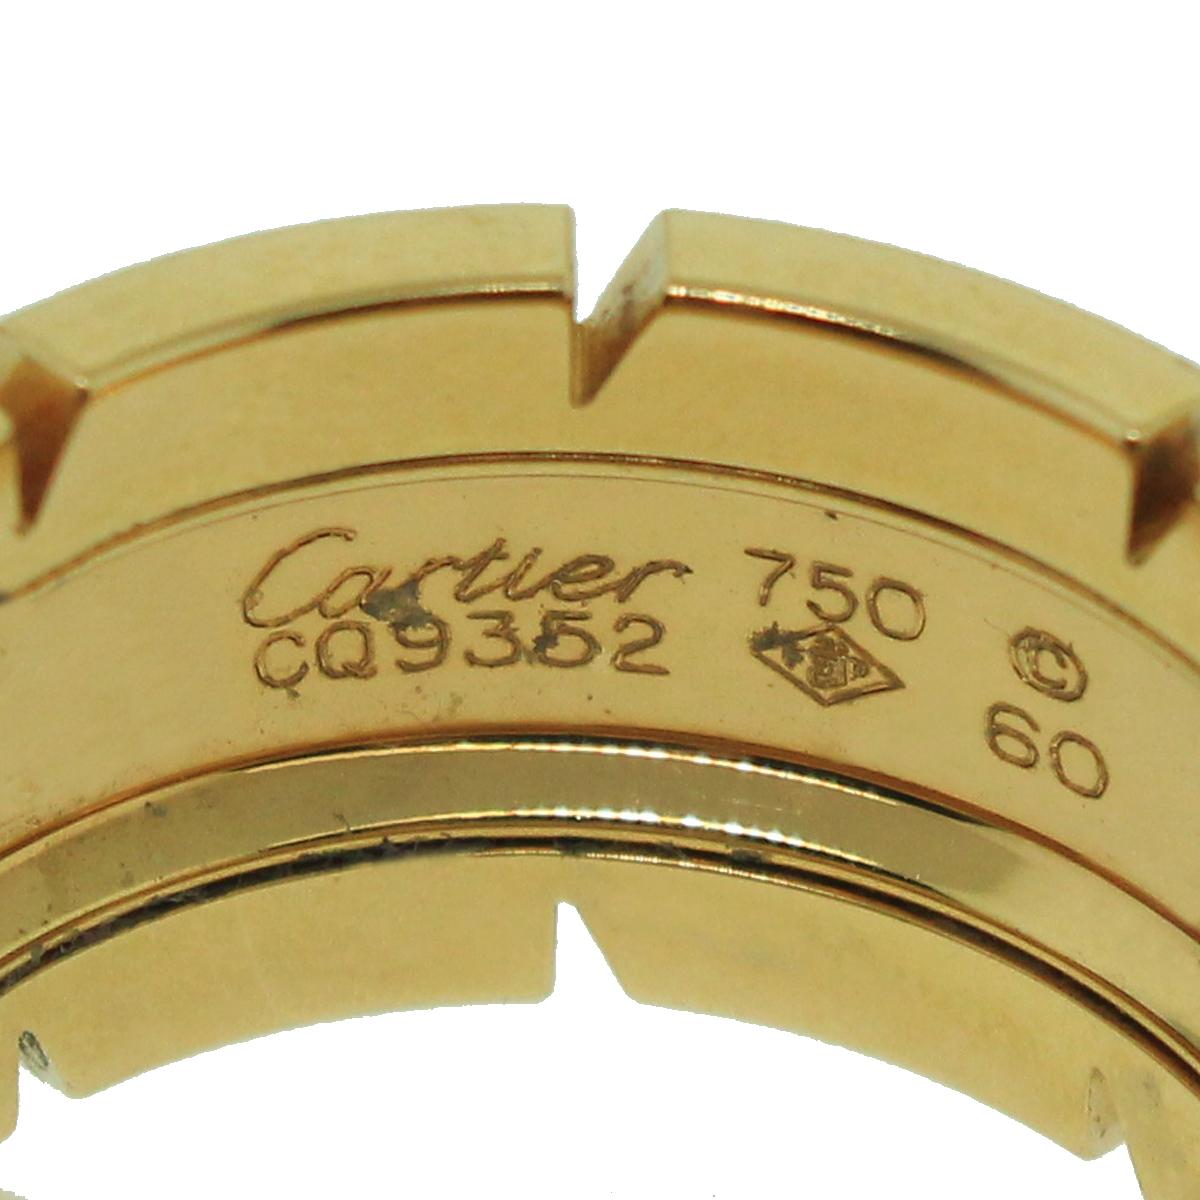 Brand: Cartier Tank Francaise
Material: 18k Yellow Gold
Ring Size: 9
Total Weight: 15.3g (9.8dwt)
Measurements: 0.80